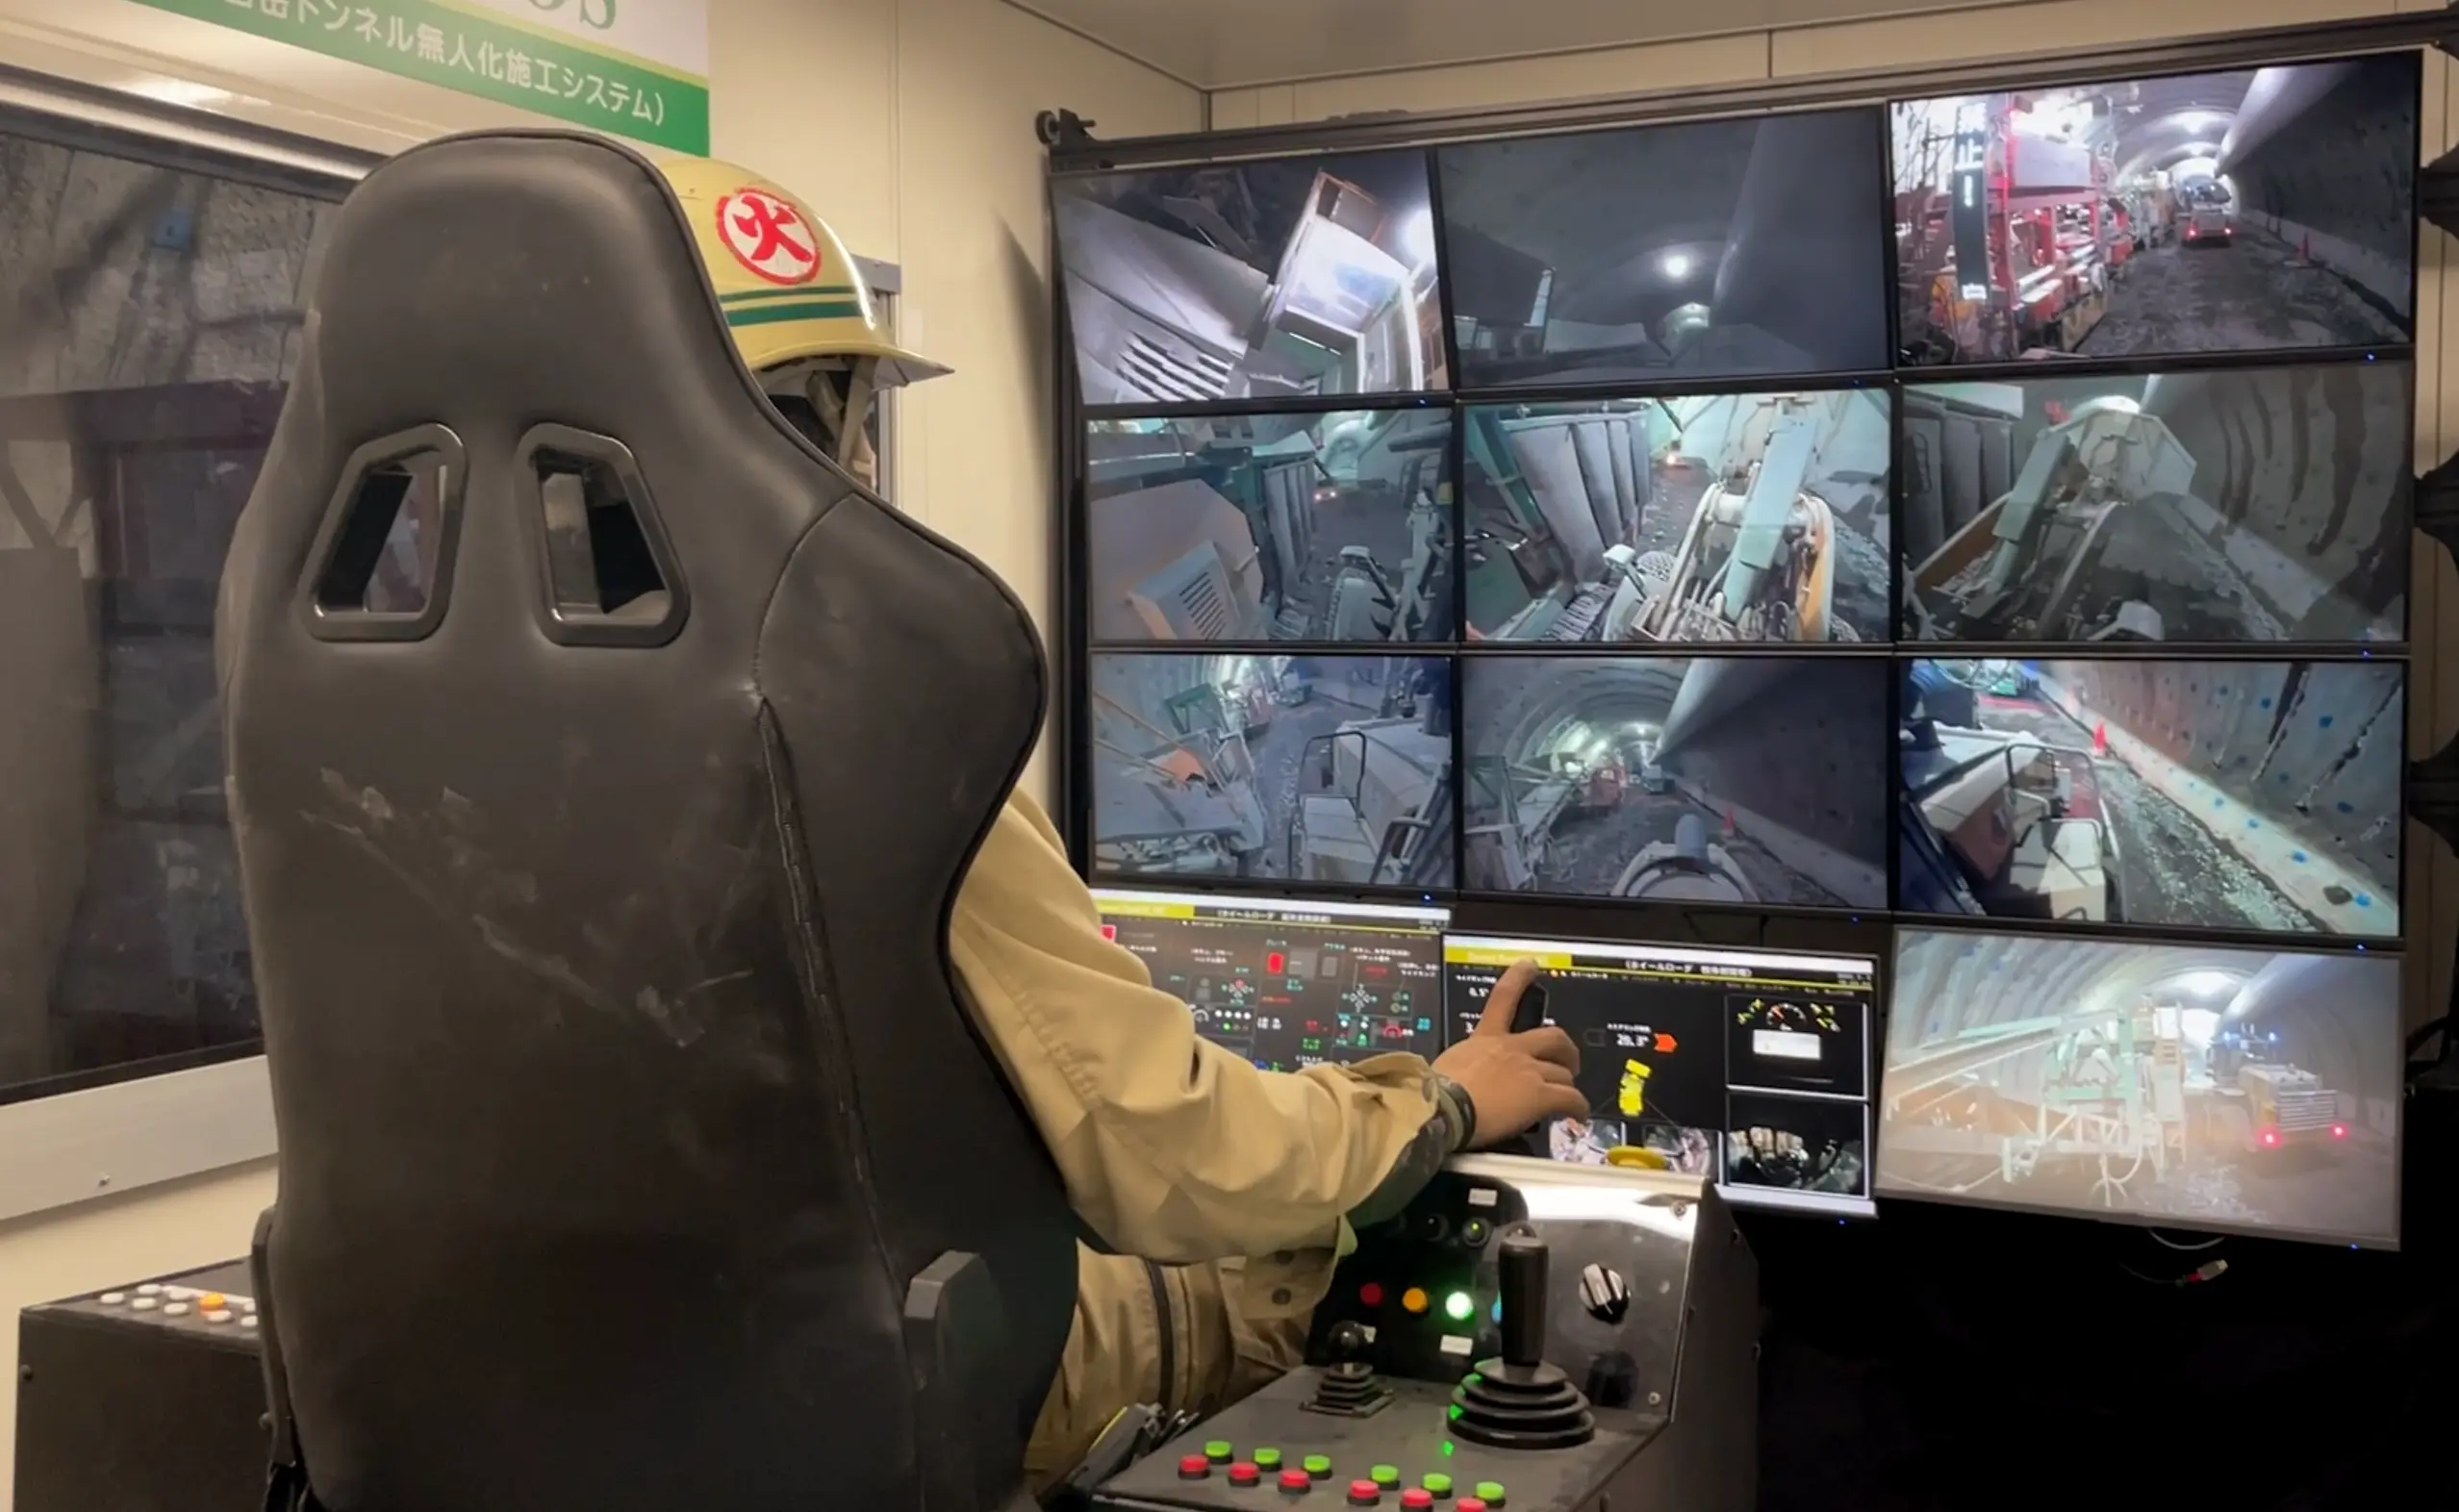 The on-site unmanned bulldozer control room